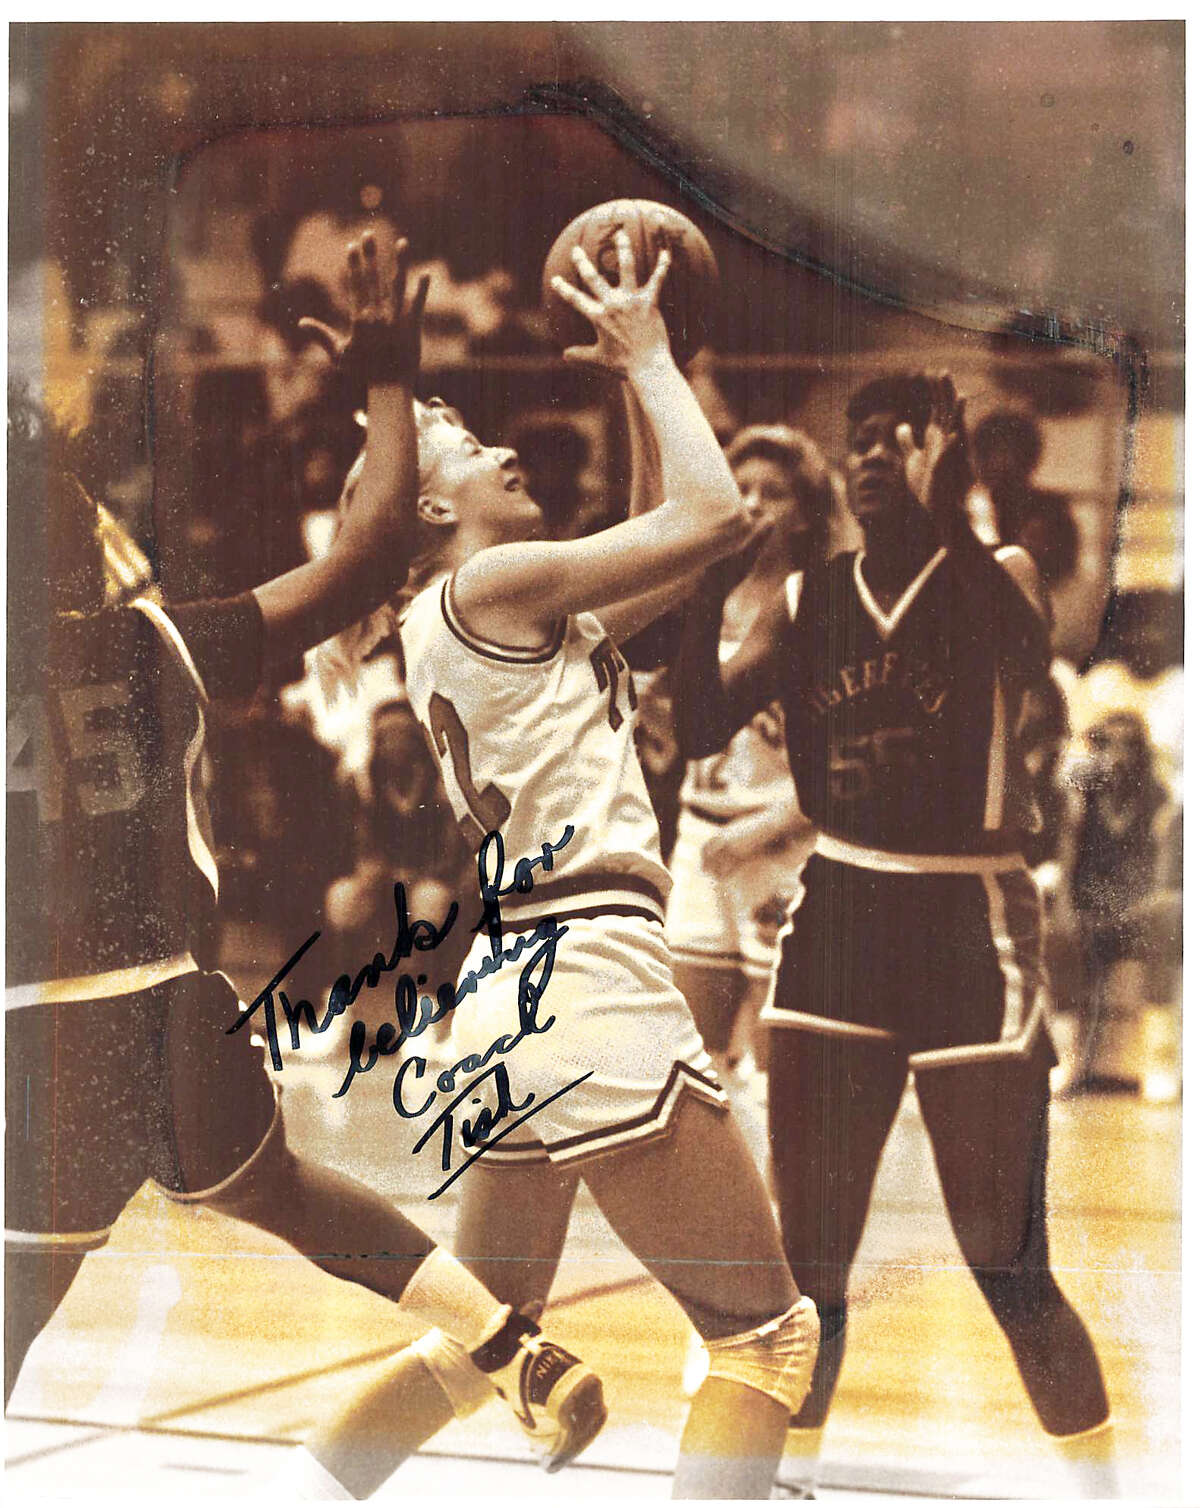 Sarah (Schreiber) Helle, a 1989 Edwardsville High School graduate, drives to the basket during her basketball playing days at EHS. The message on the photo is from her coach, the late Dave Tissier.